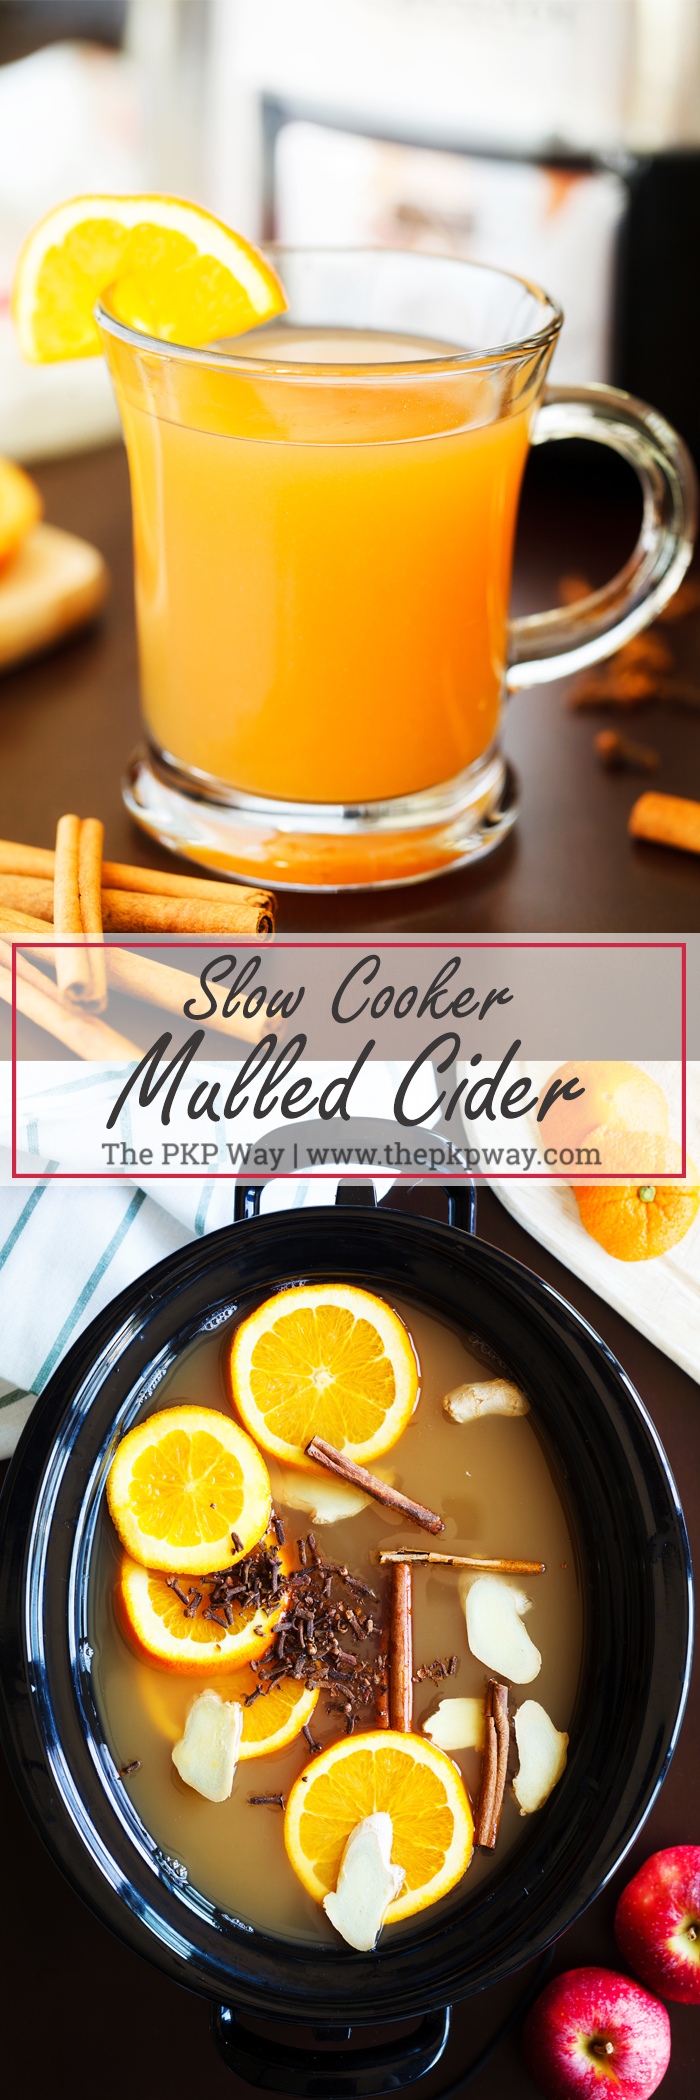 Slow Cooker Mulled Cider - The PKP Way